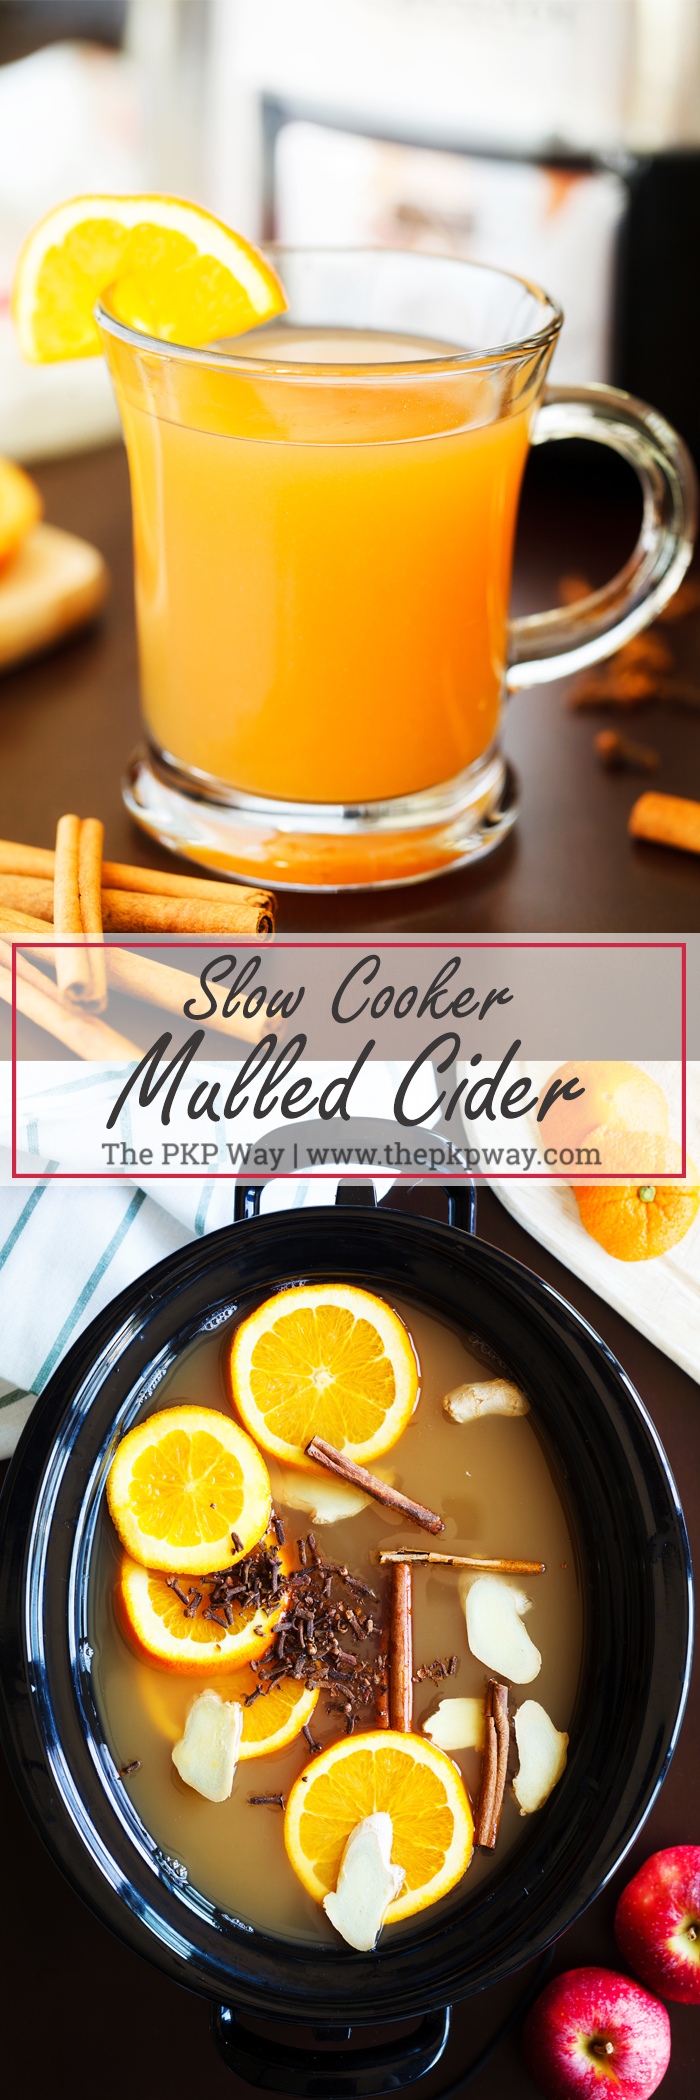 Slow Cooker Mulled Cider - The PKP Way